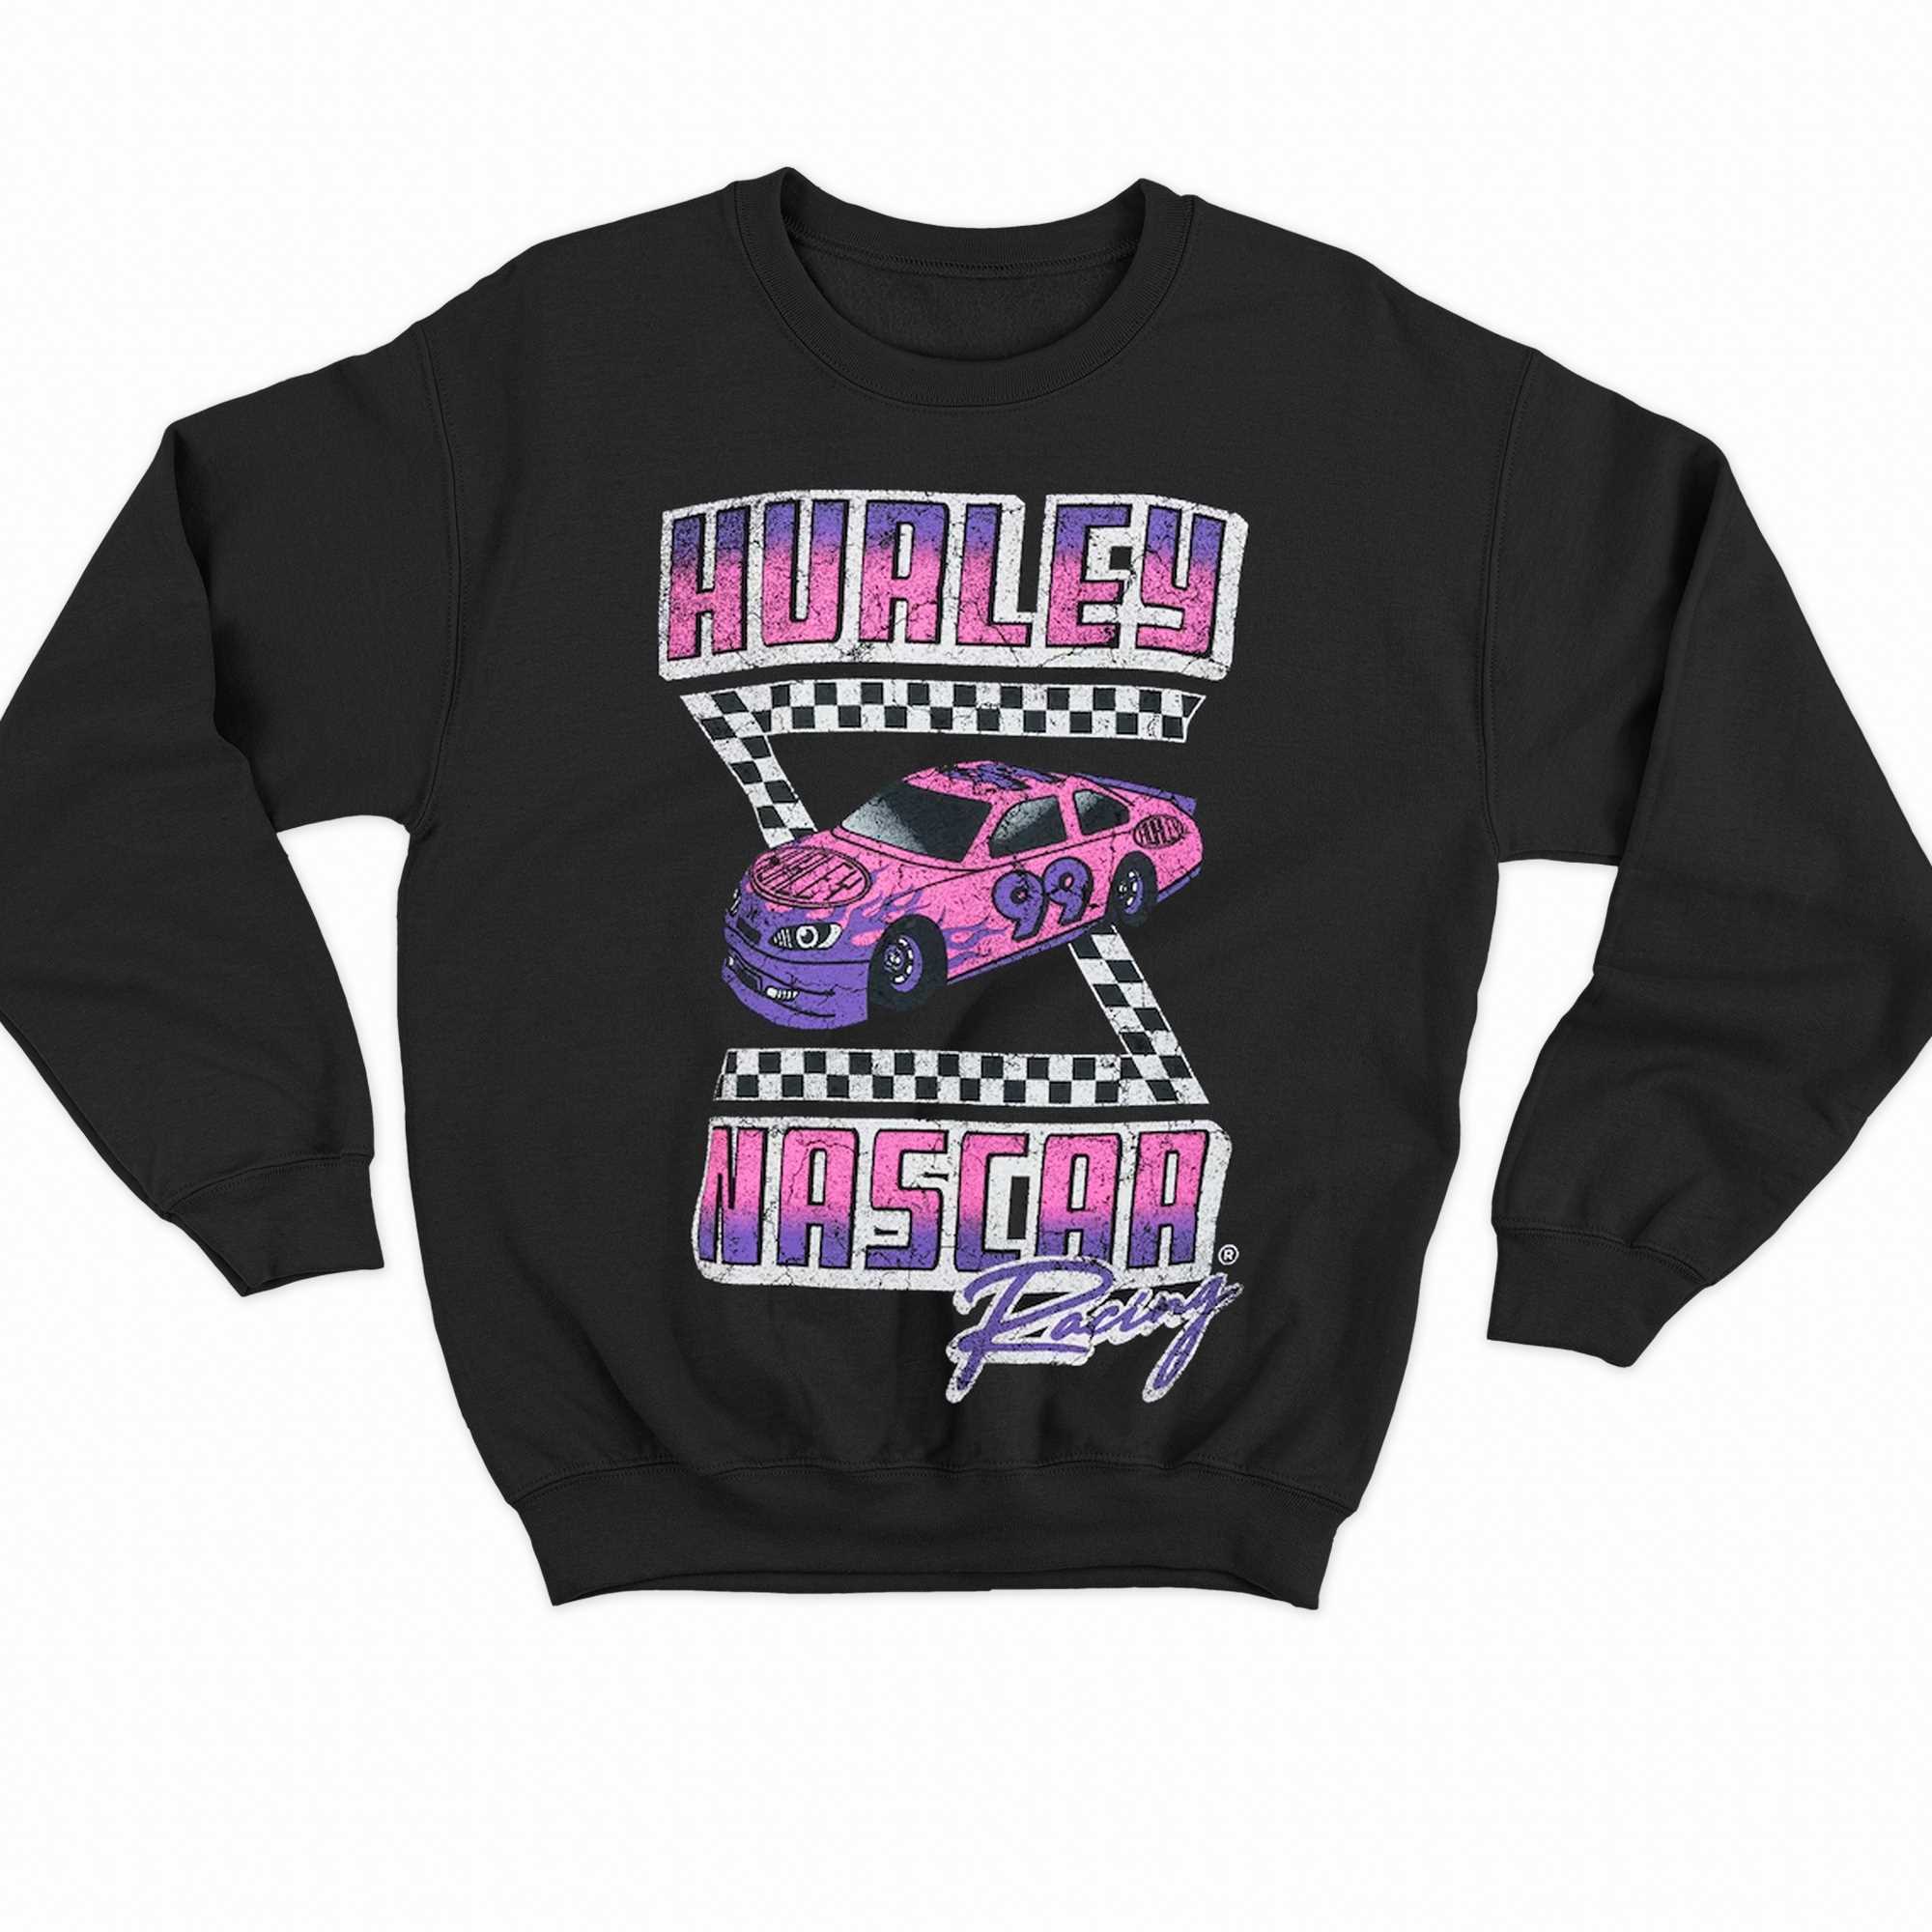 Nascar Hurley X Everyday Faster T-shirt 